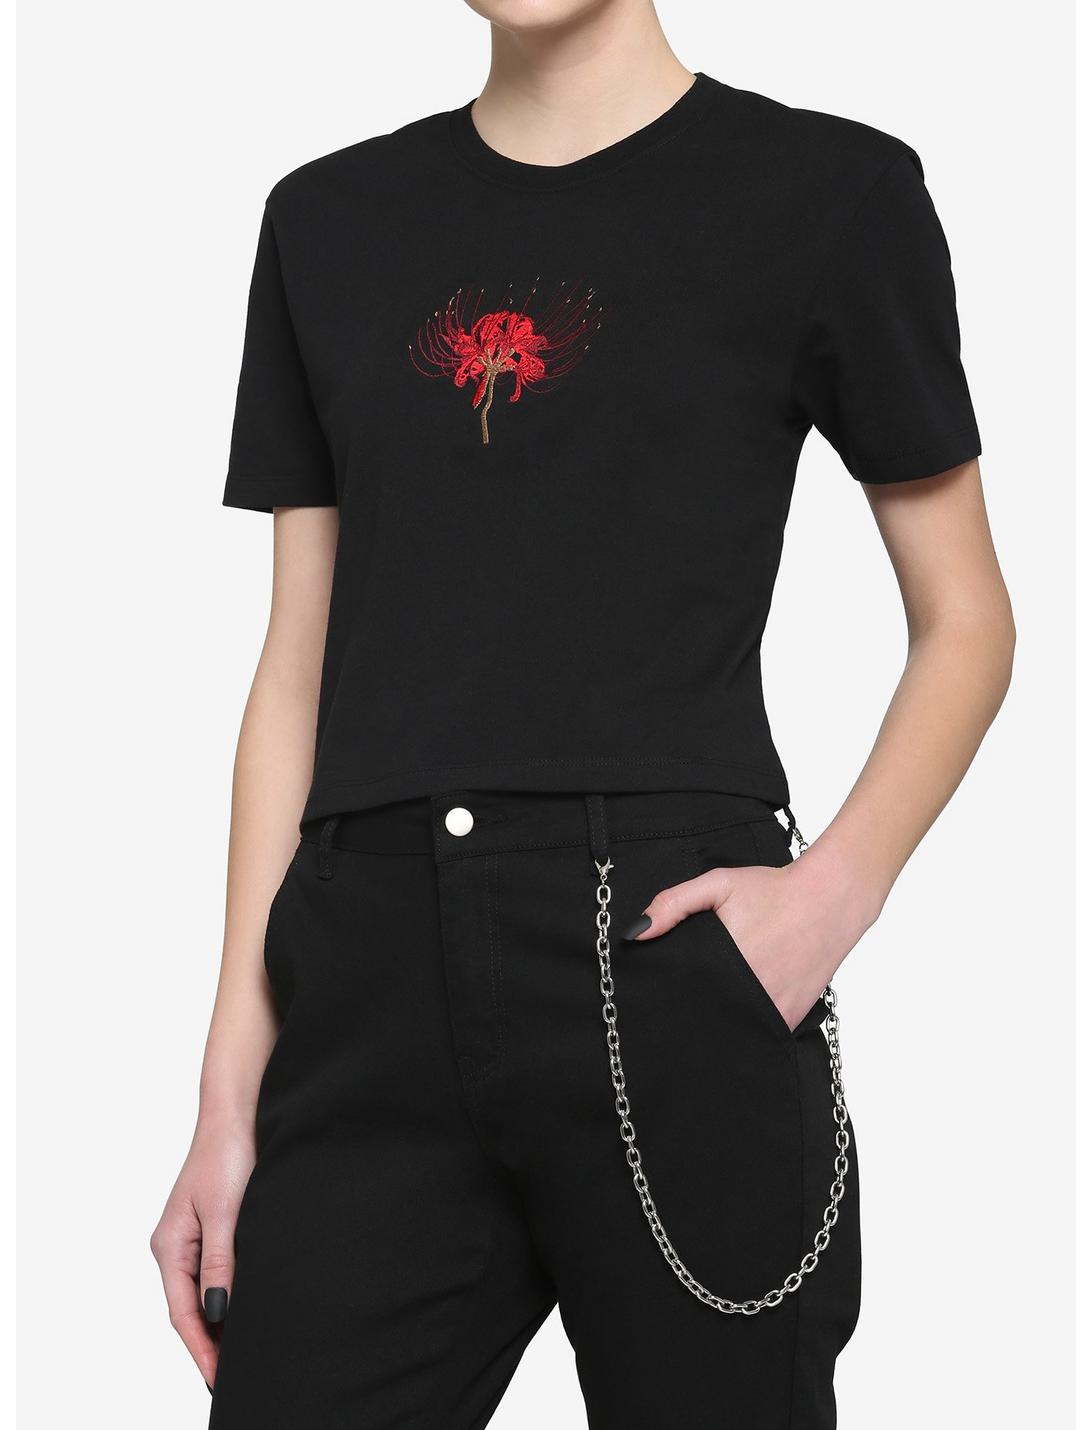 Spider Lily Embroidered Boxy Girls Crop T-Shirt, BLACK, hi-res